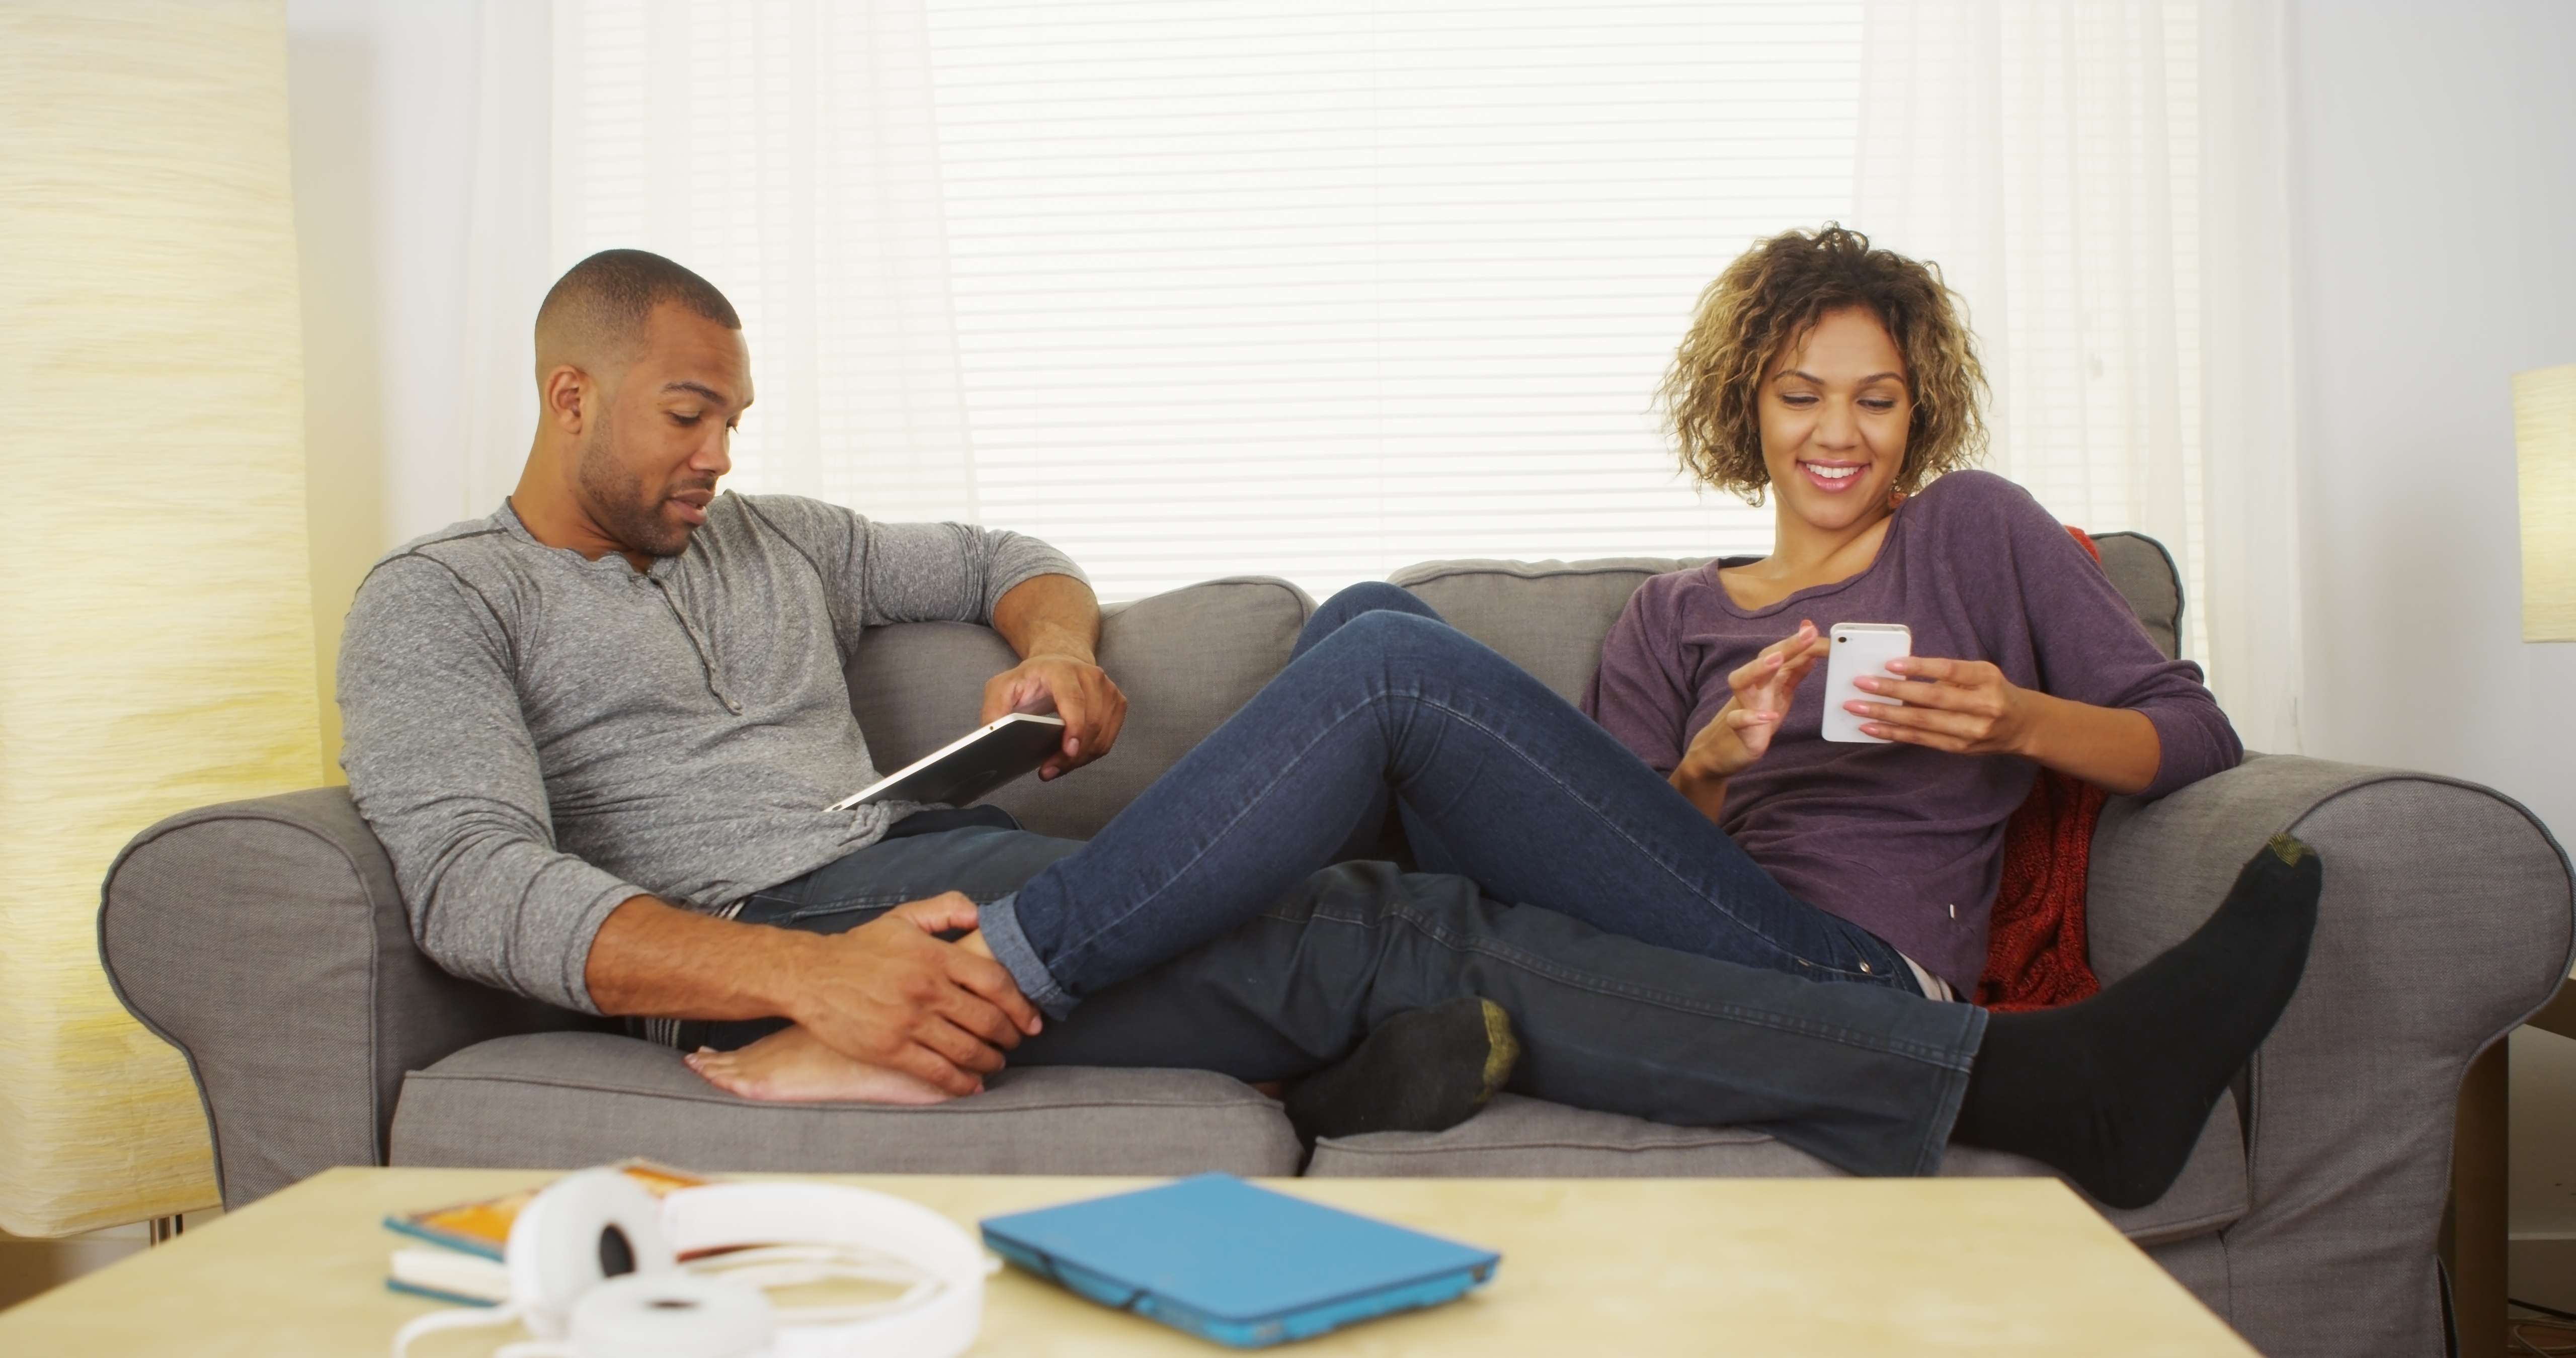 man and woman sitting lovingly on couch, what he wants you to say